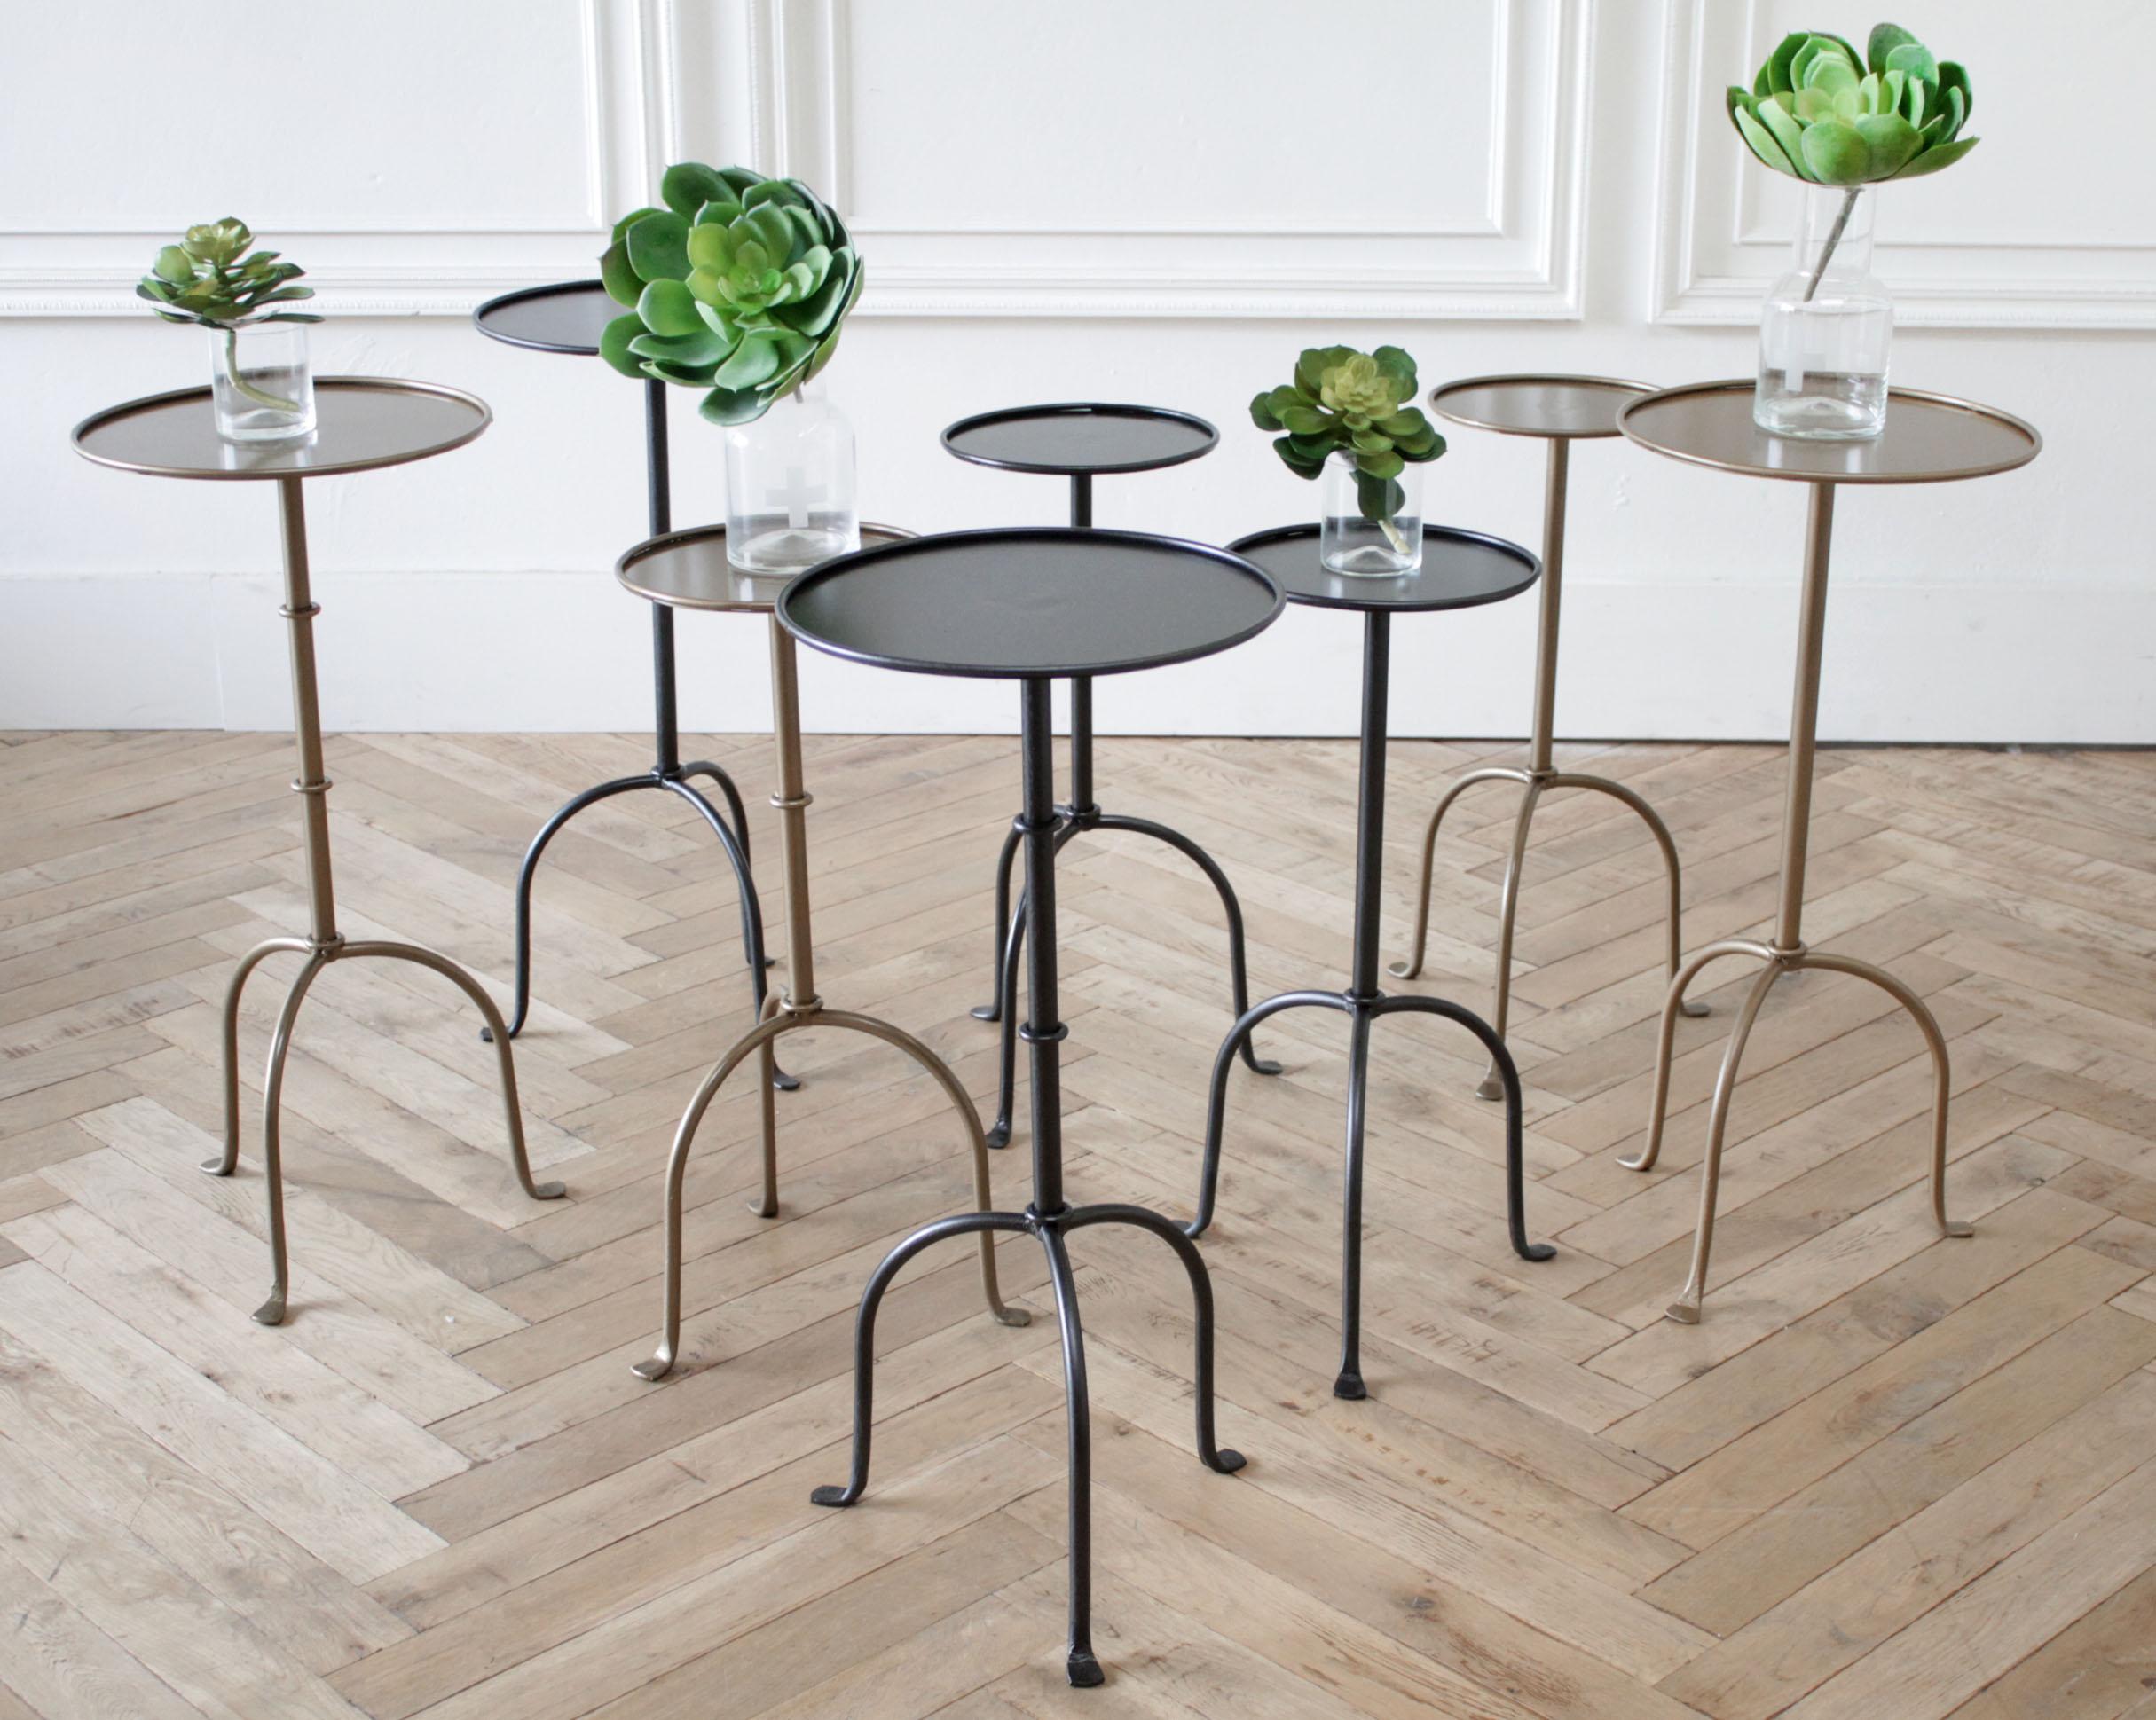 Cannes Tall Iron Drink Table in Brass Finish In New Condition For Sale In Brea, CA